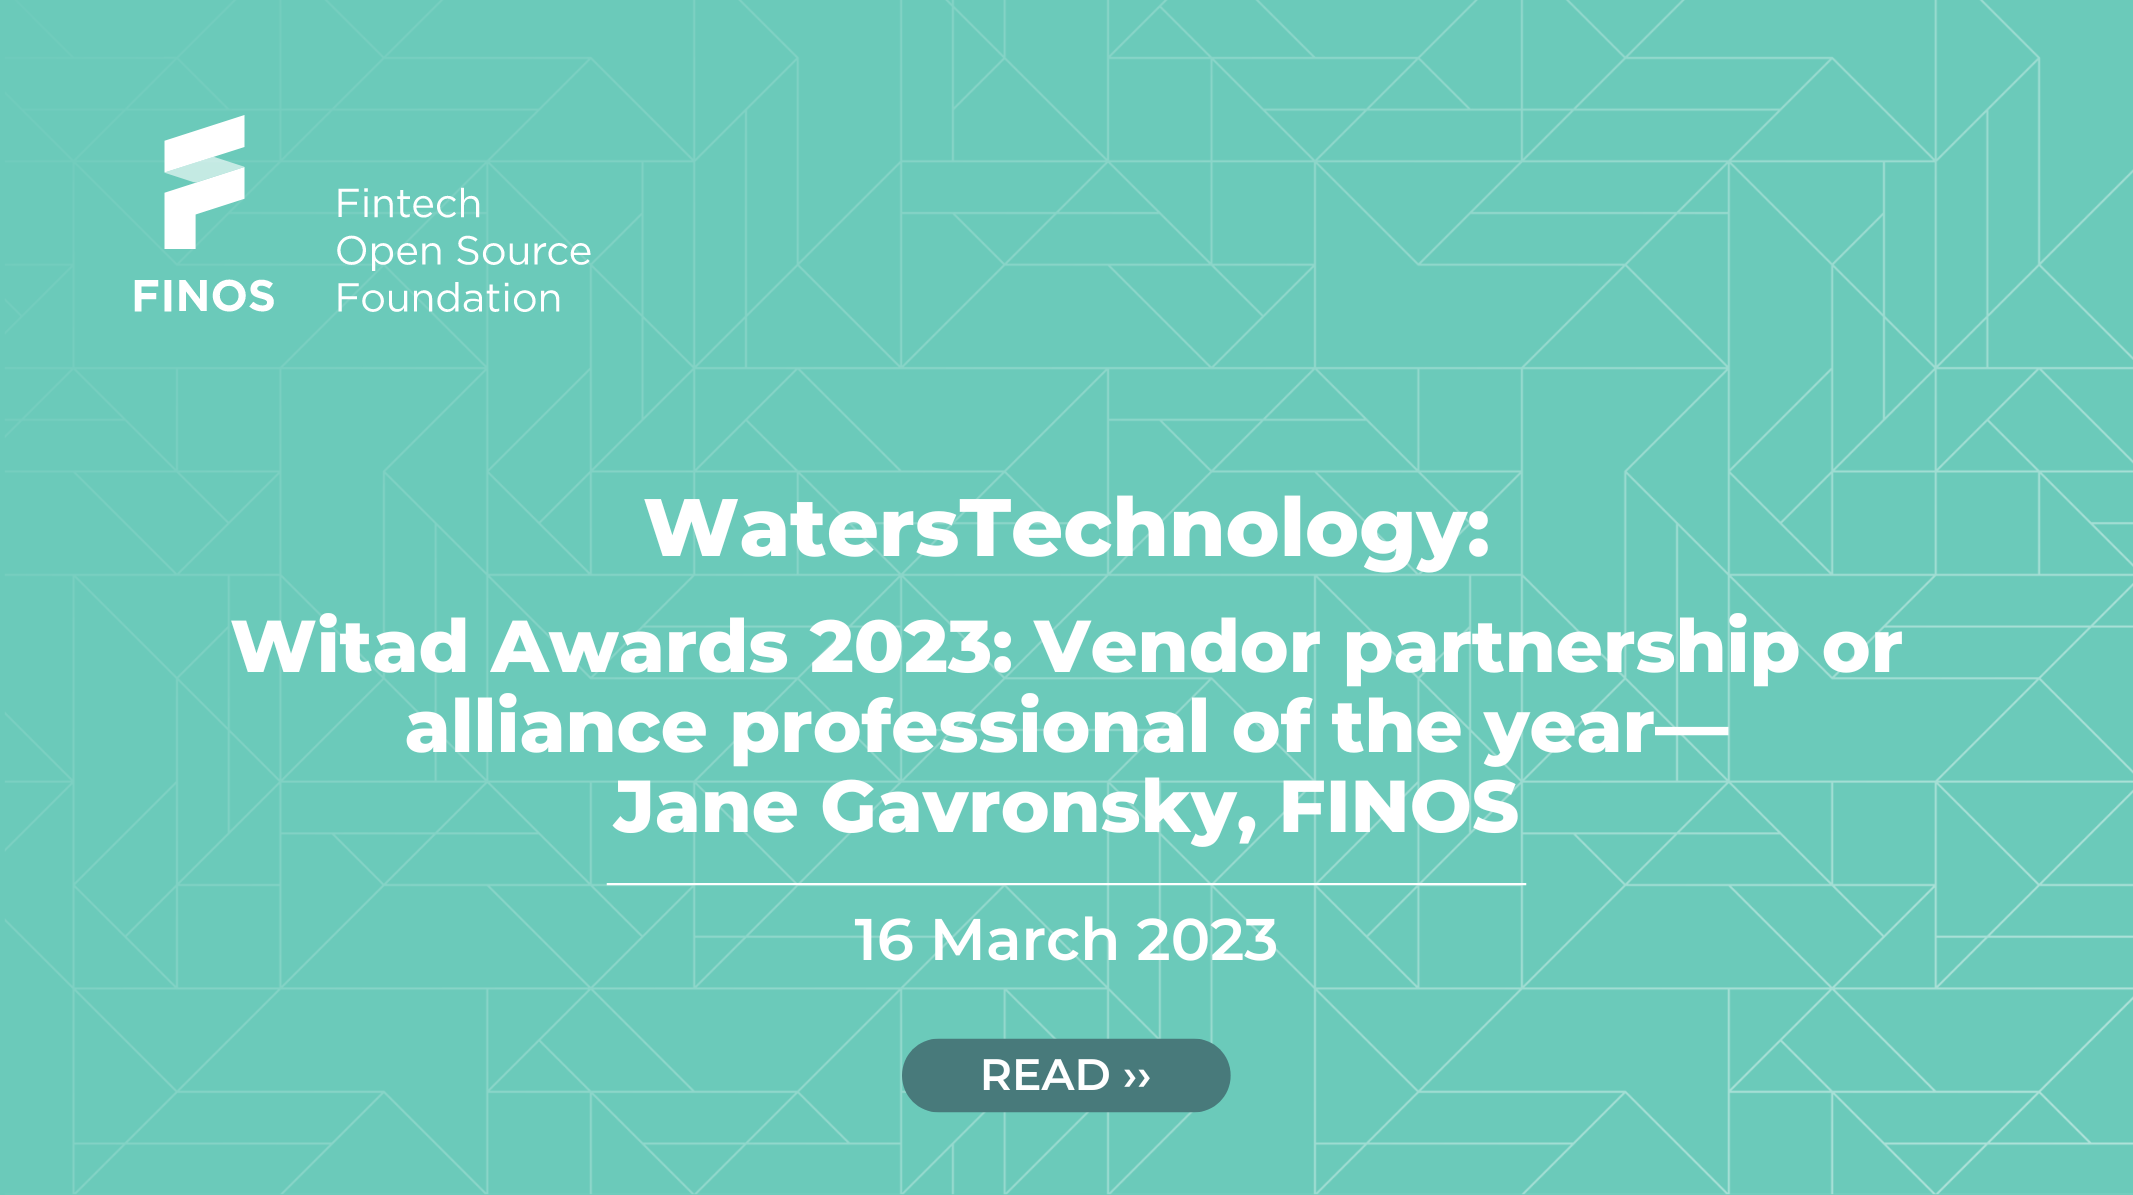 Waters Technology: Witad Awards 2023: Vendor partnership or alliance professional of the year—Jane Gavronsky, FINOS